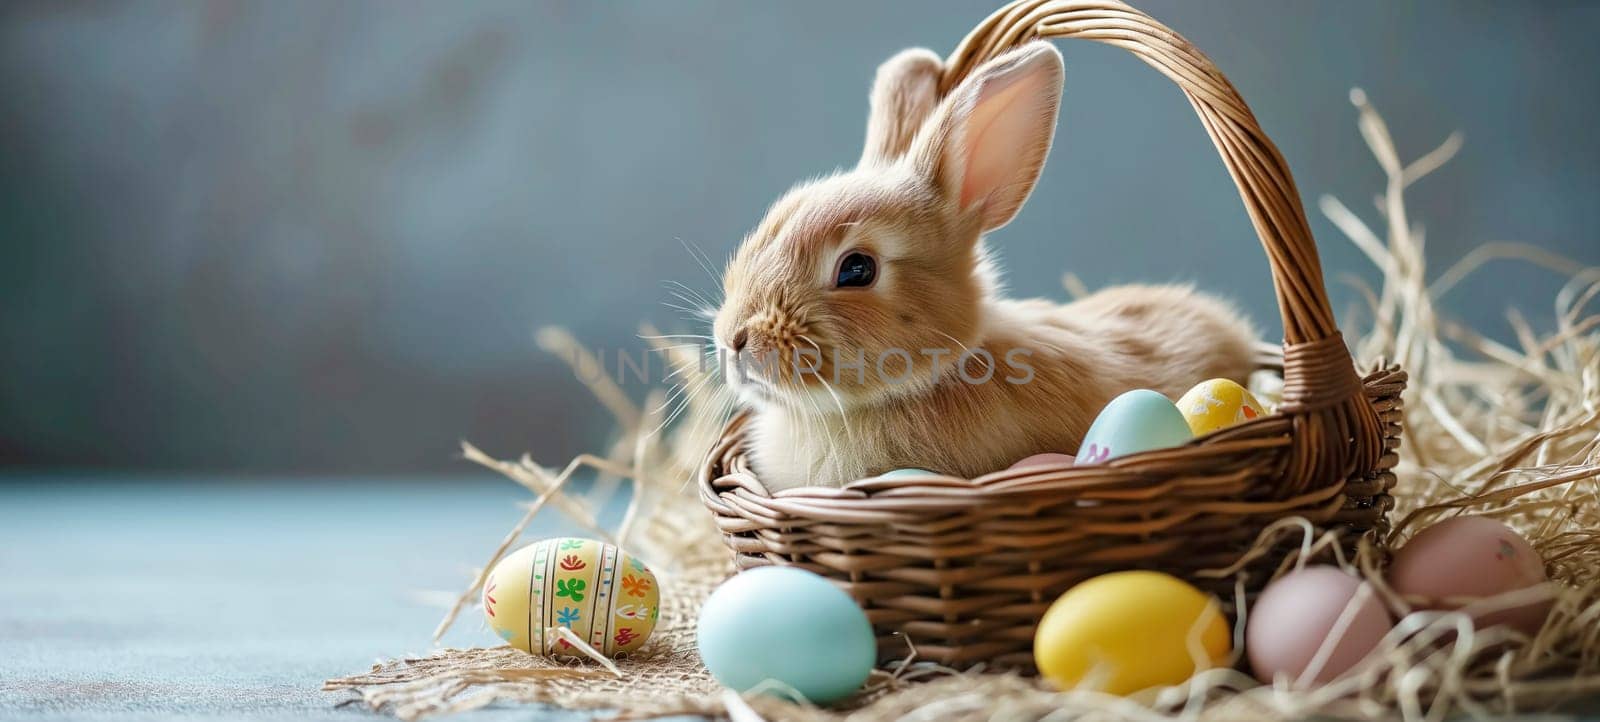 Cute young Easter bunny in a wicker basket with dyed eggs on a wooden table by andreyz